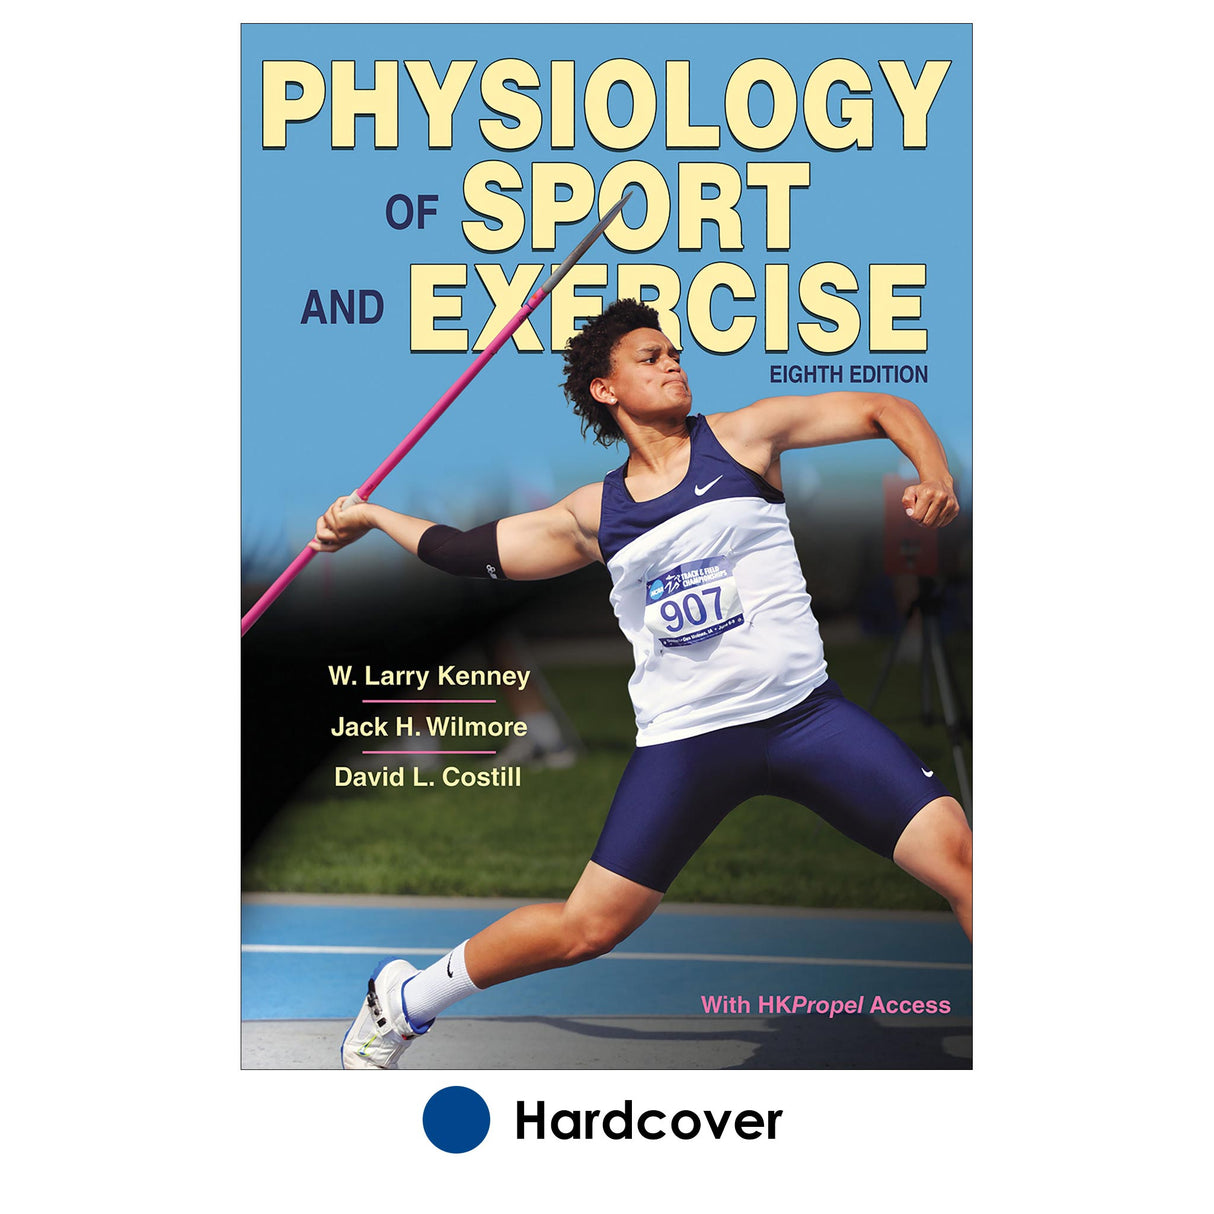 Physiology of Sport and Exercise 8th Edition With HKPropel Access